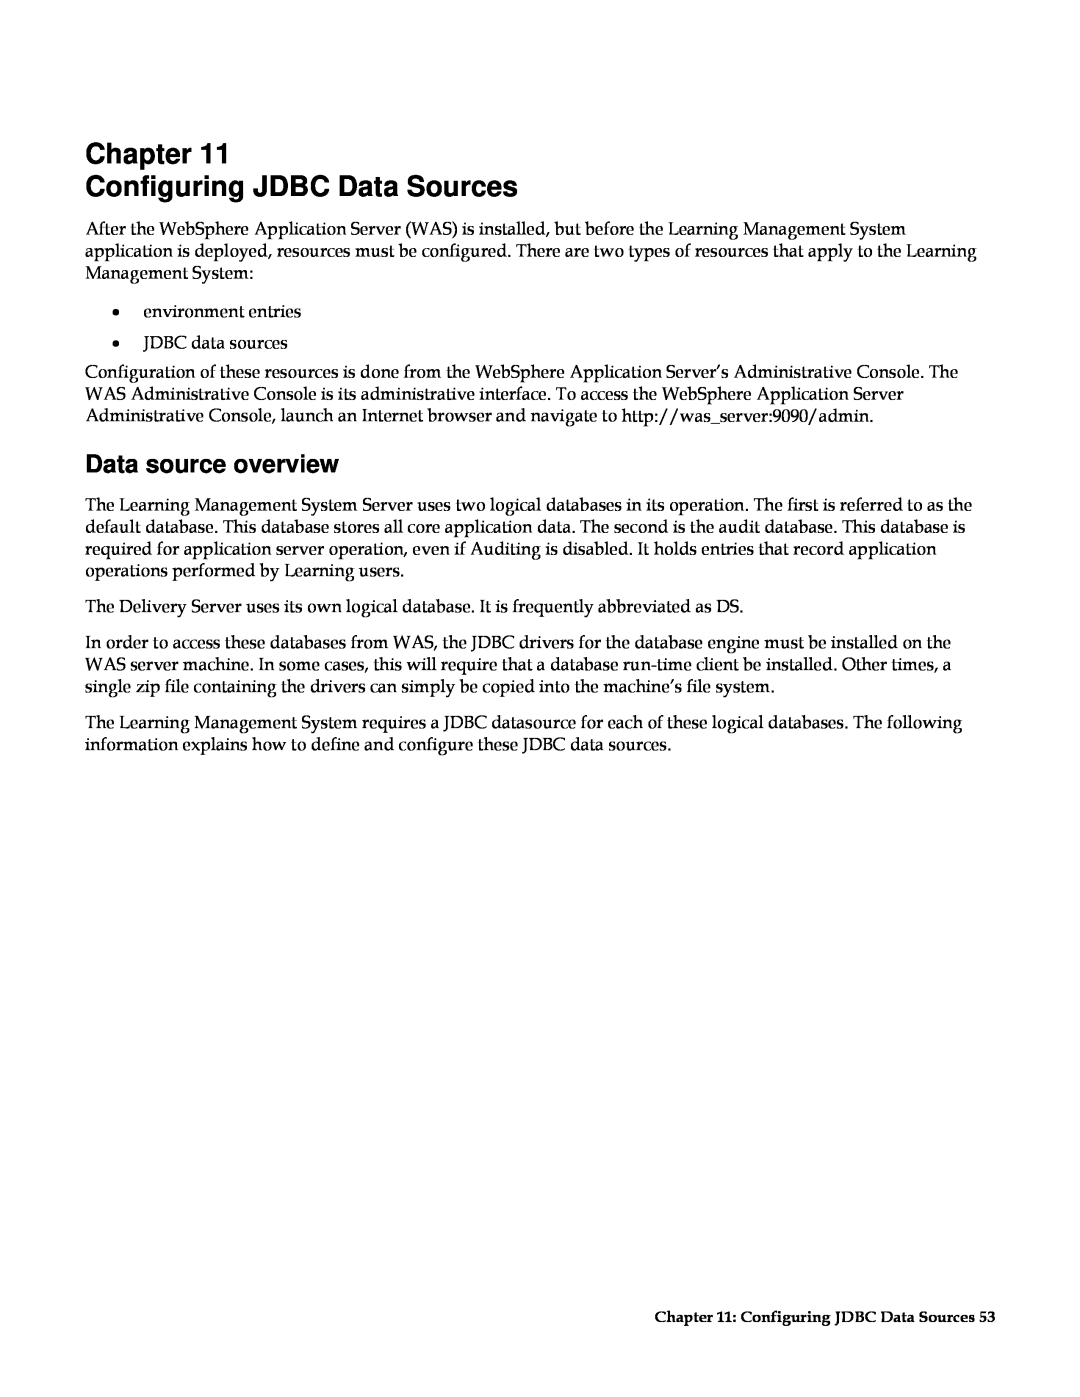 IBM G210-1784-00 manual Chapter Configuring JDBC Data Sources, Data source overview 